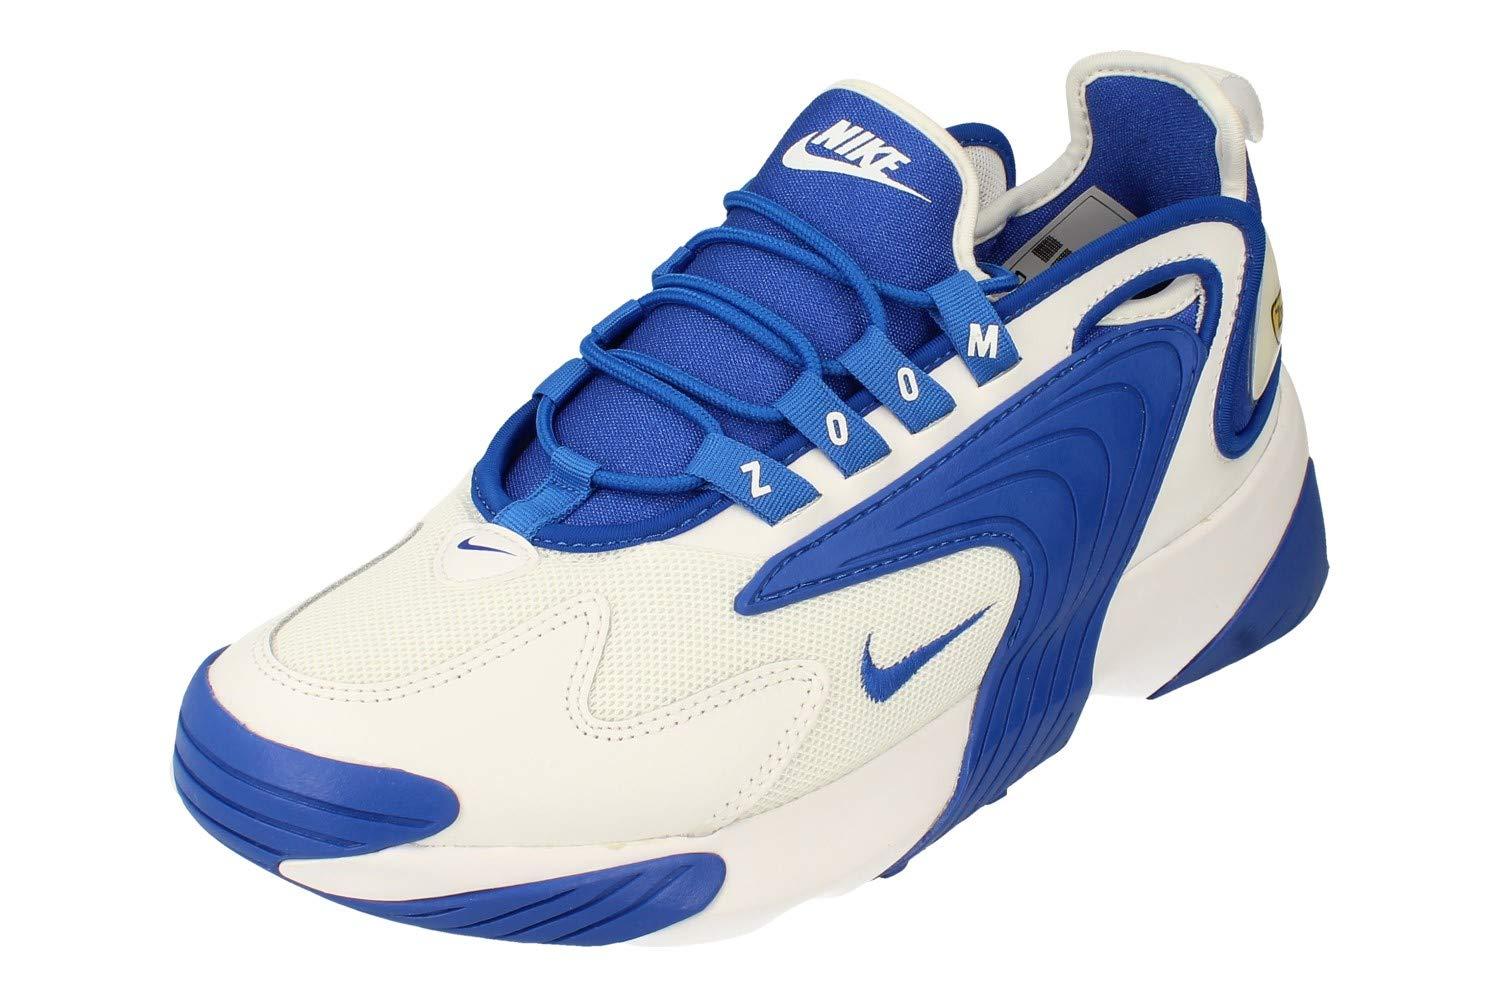 Nike Leather Zoom 2k in White Grey Blue (White) for Men - Save 64% - Lyst